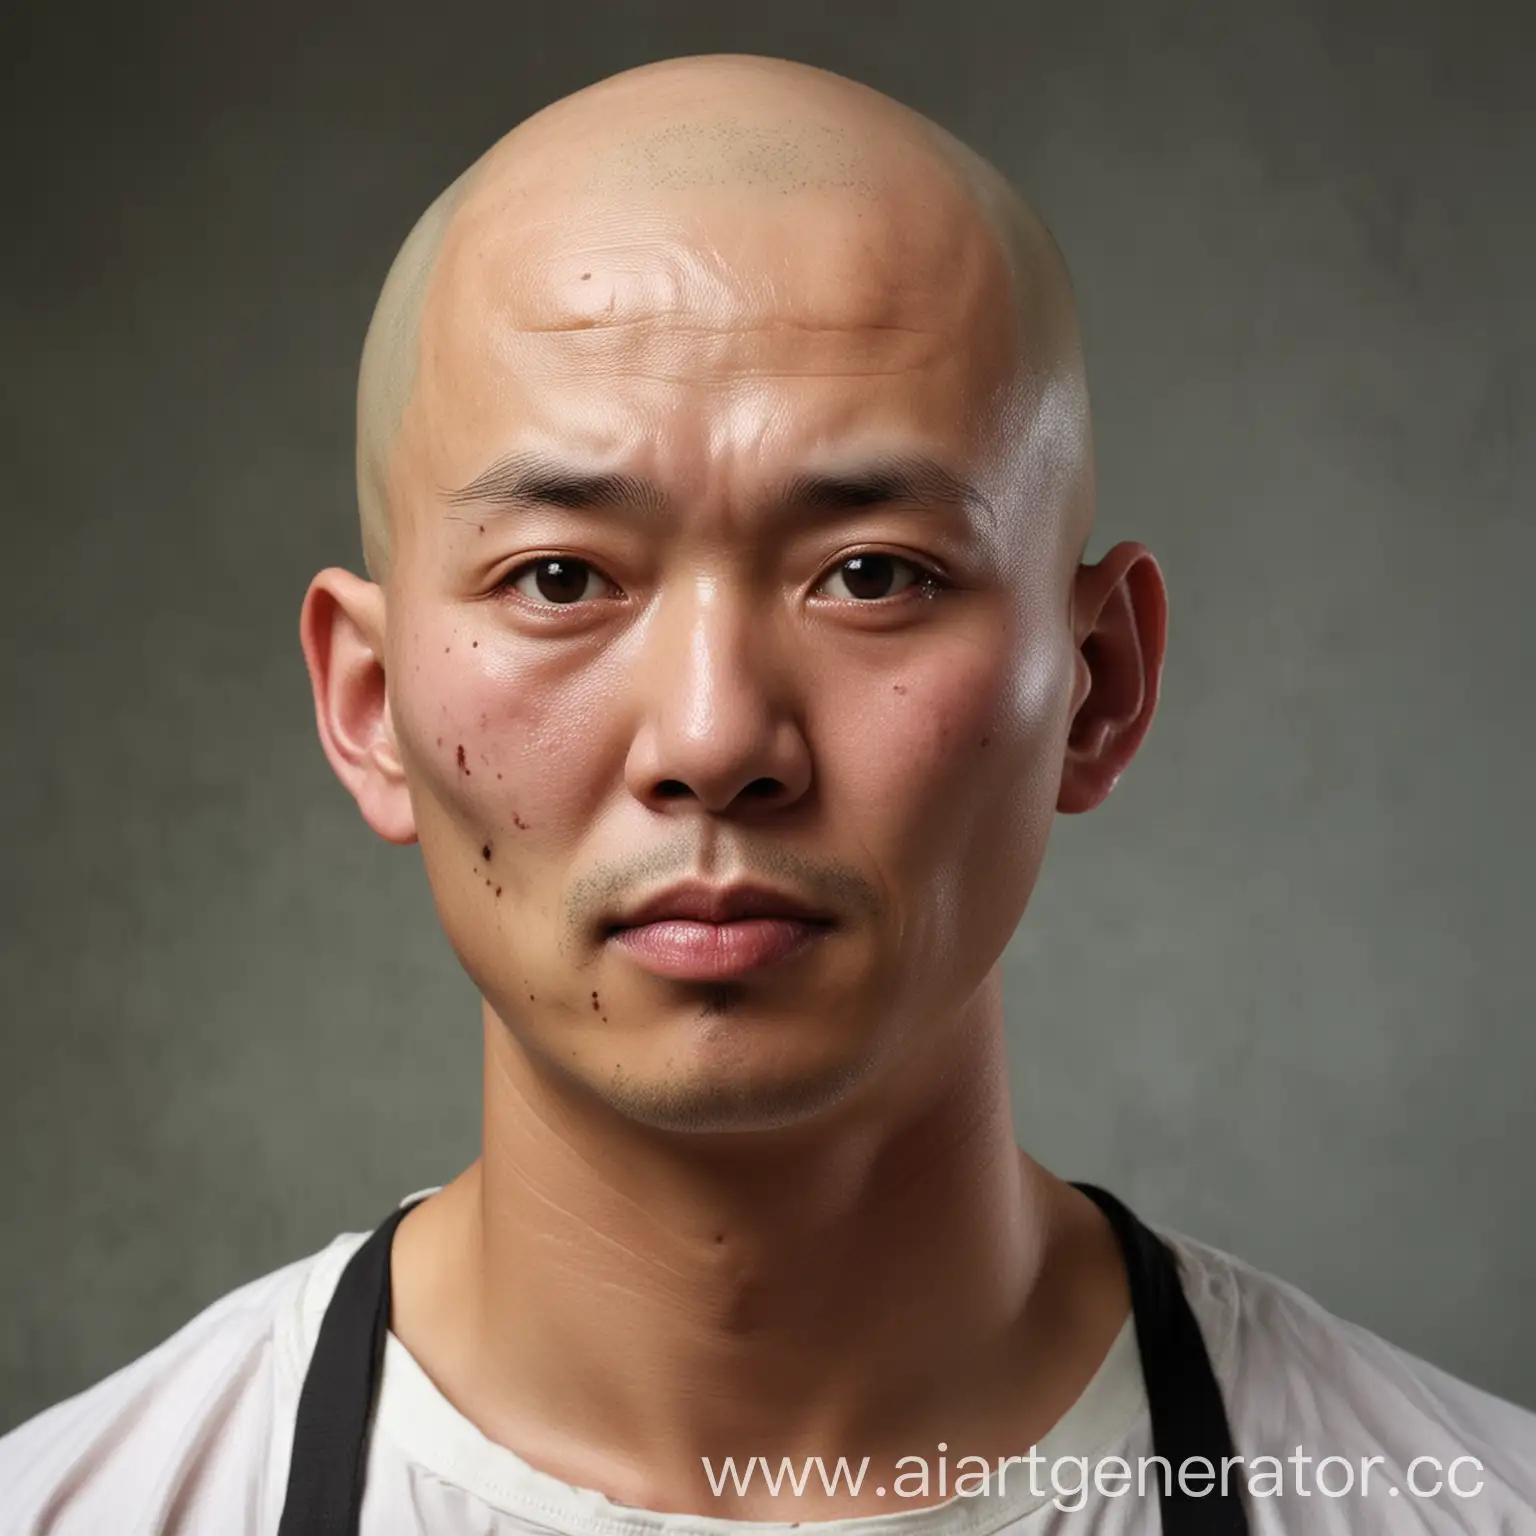 Sturdy-Chinese-Butcher-with-Bald-Head-A-Portrait-of-Determination